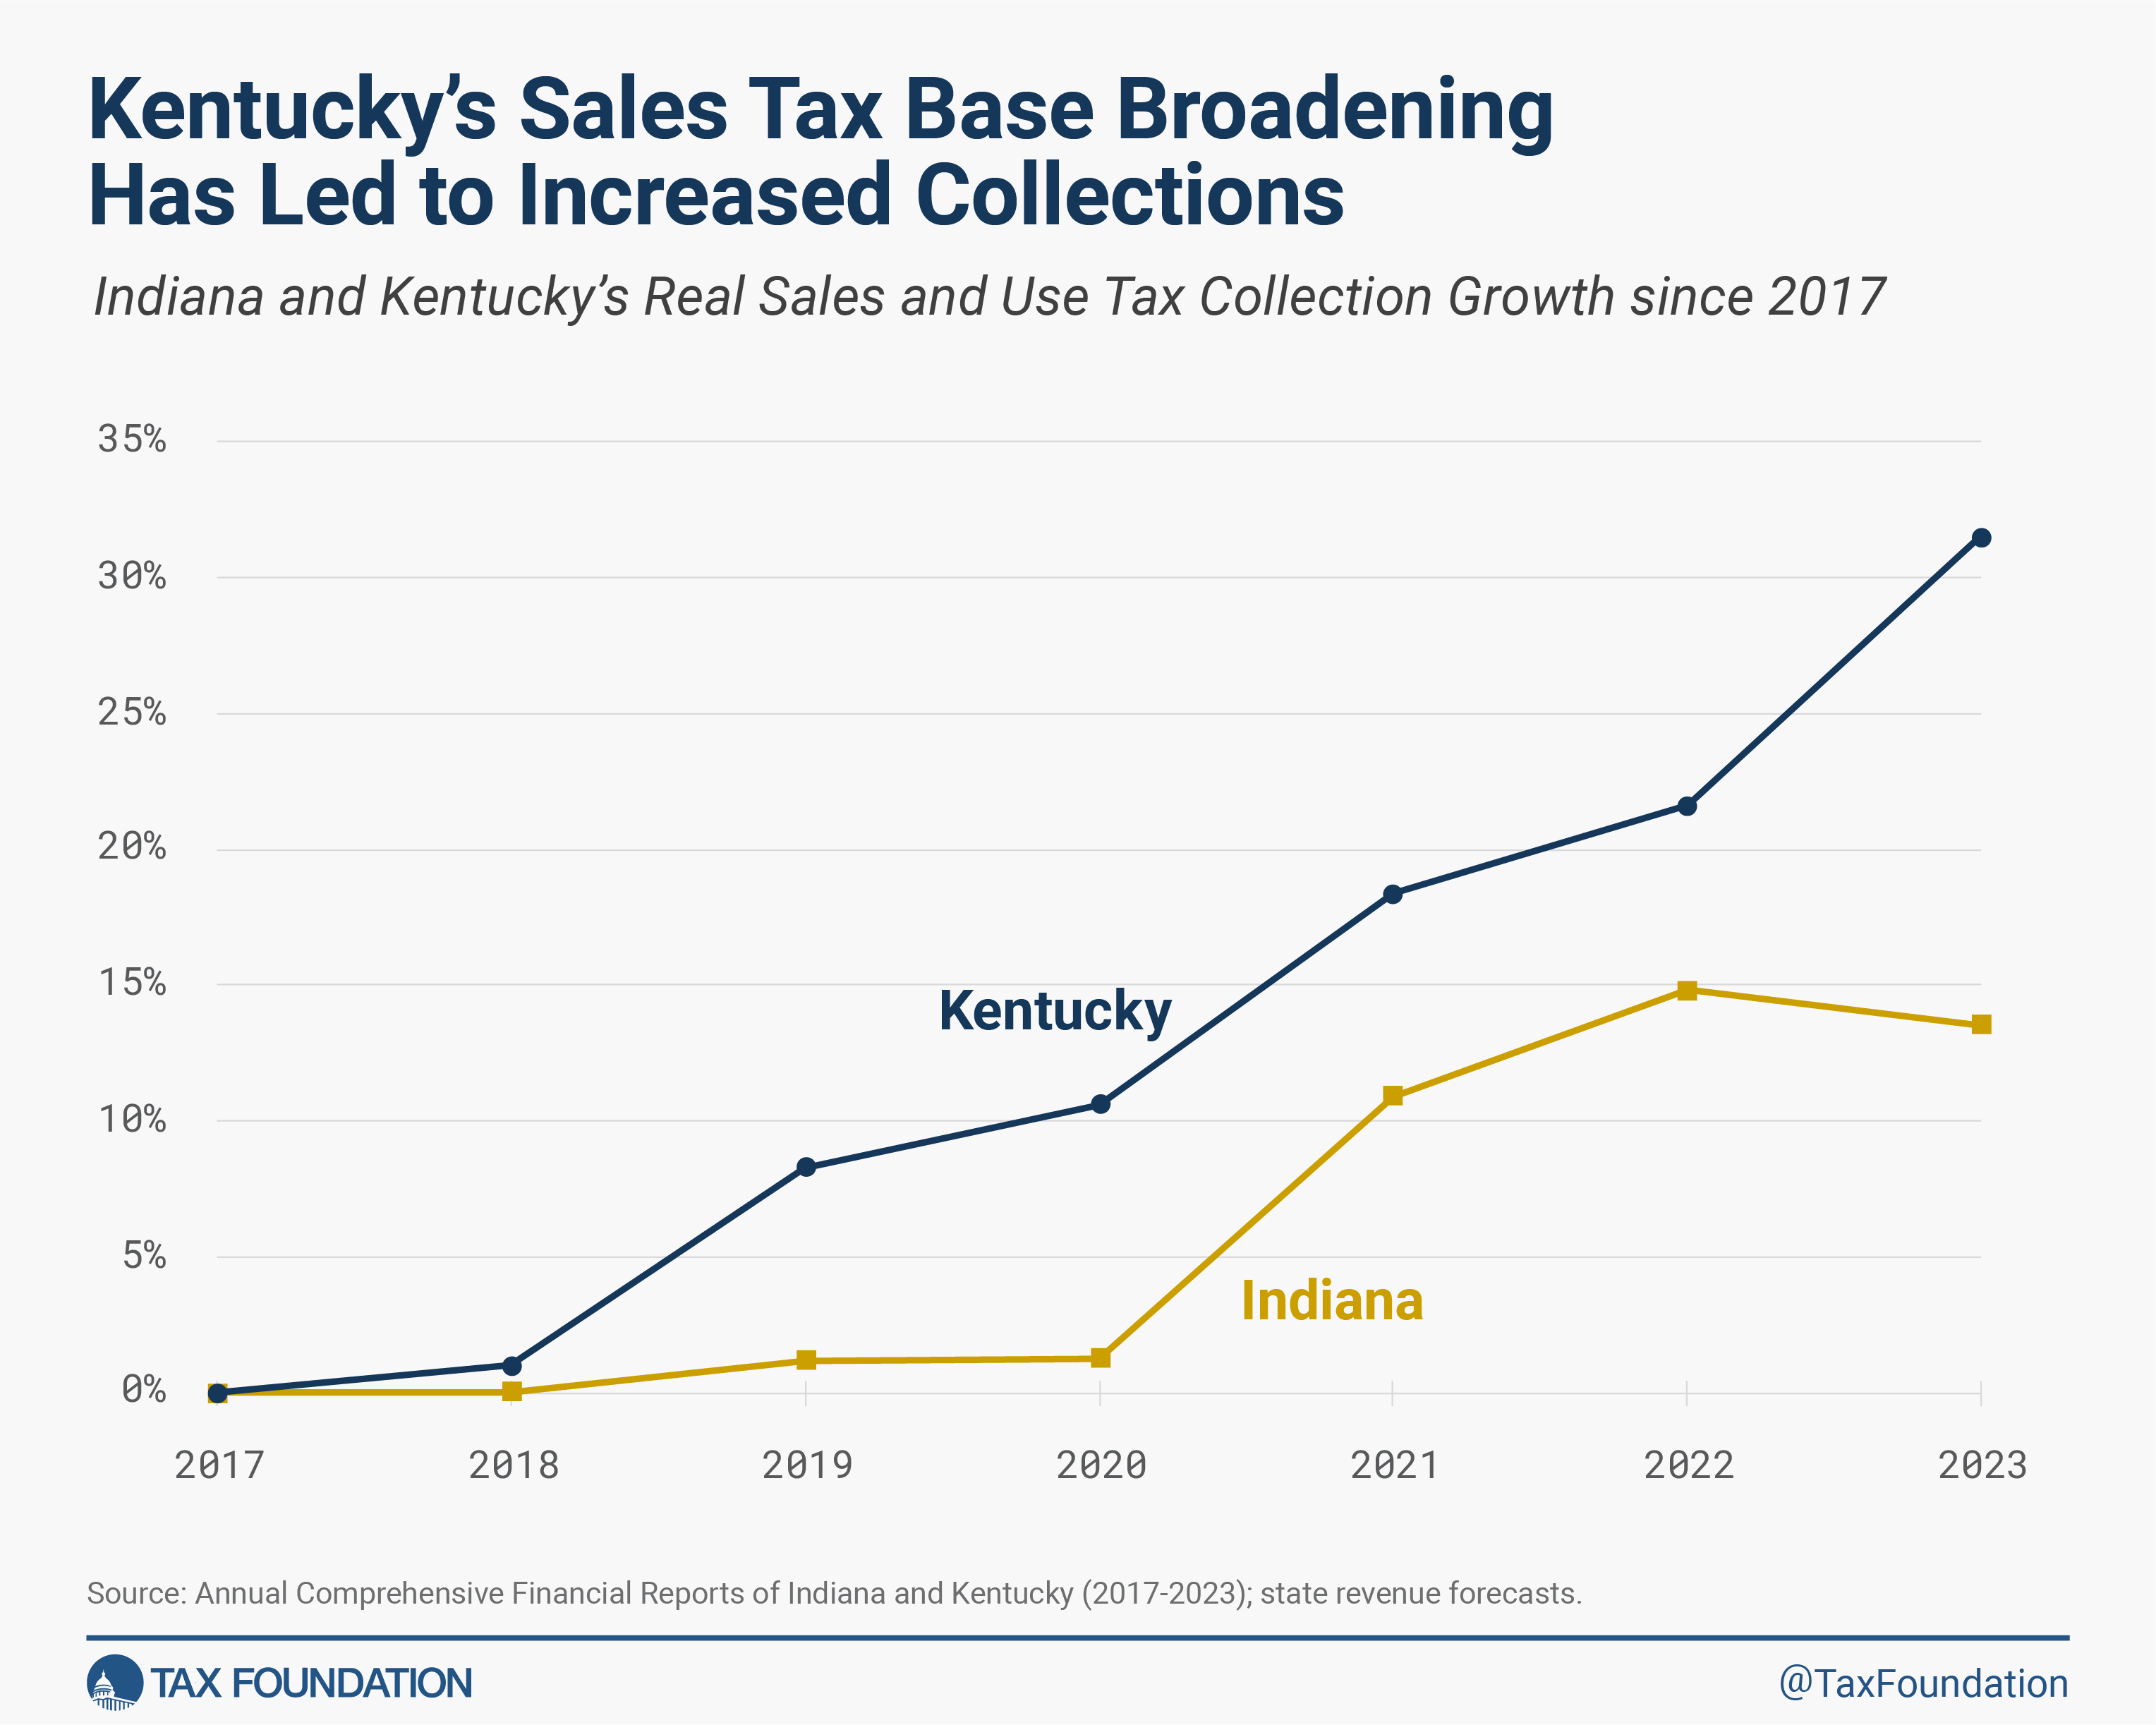 Kentucky sales tax base broadening has led to increased tax collections